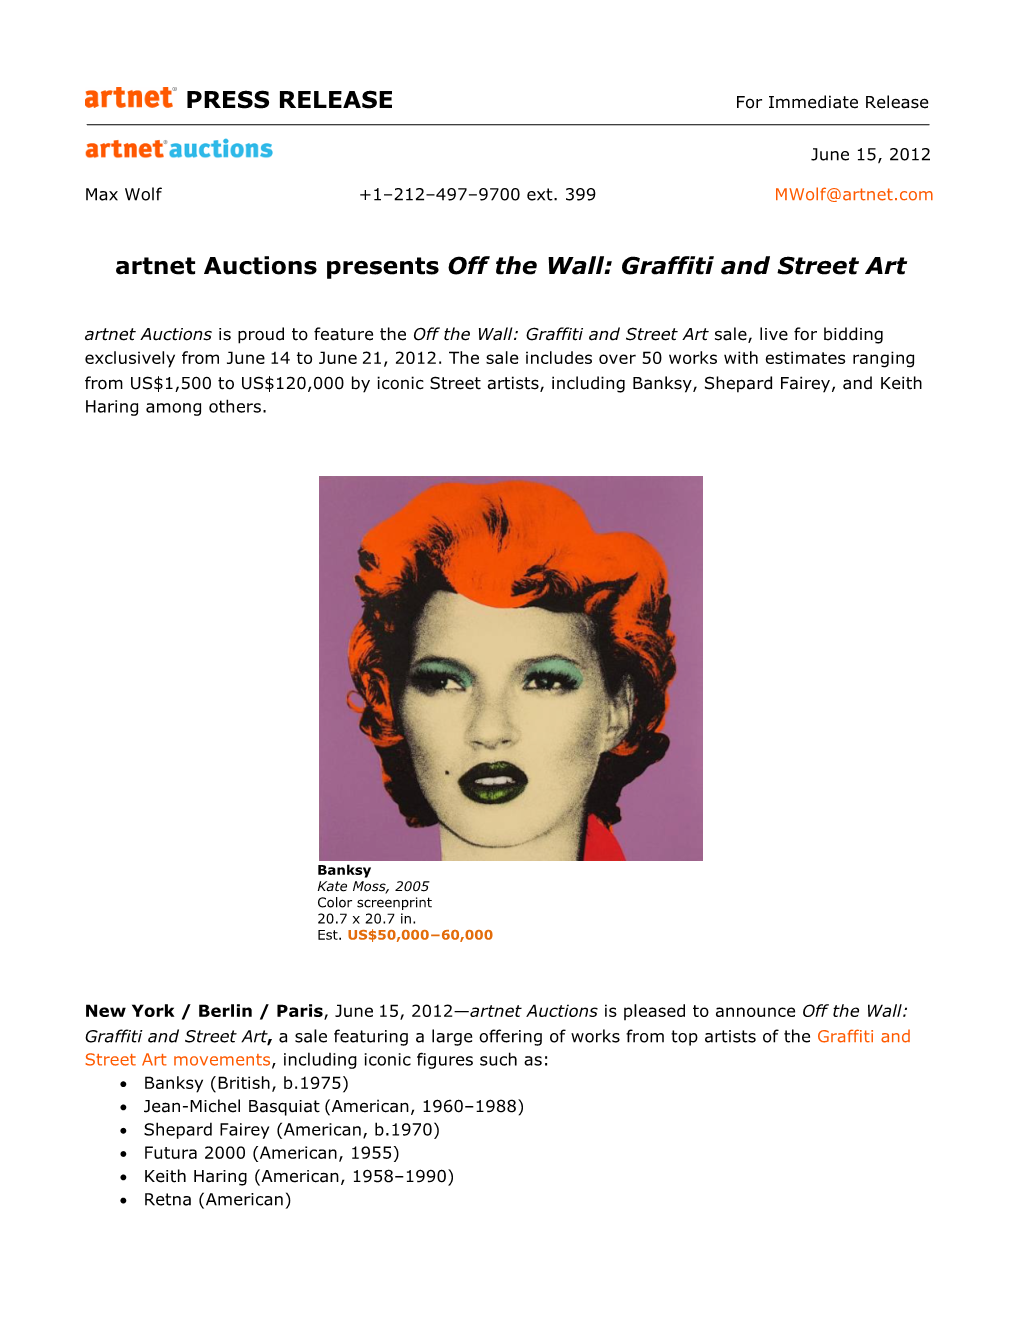 PRESS RELEASE Artnet Auctions Presents Off the Wall: Graffiti And